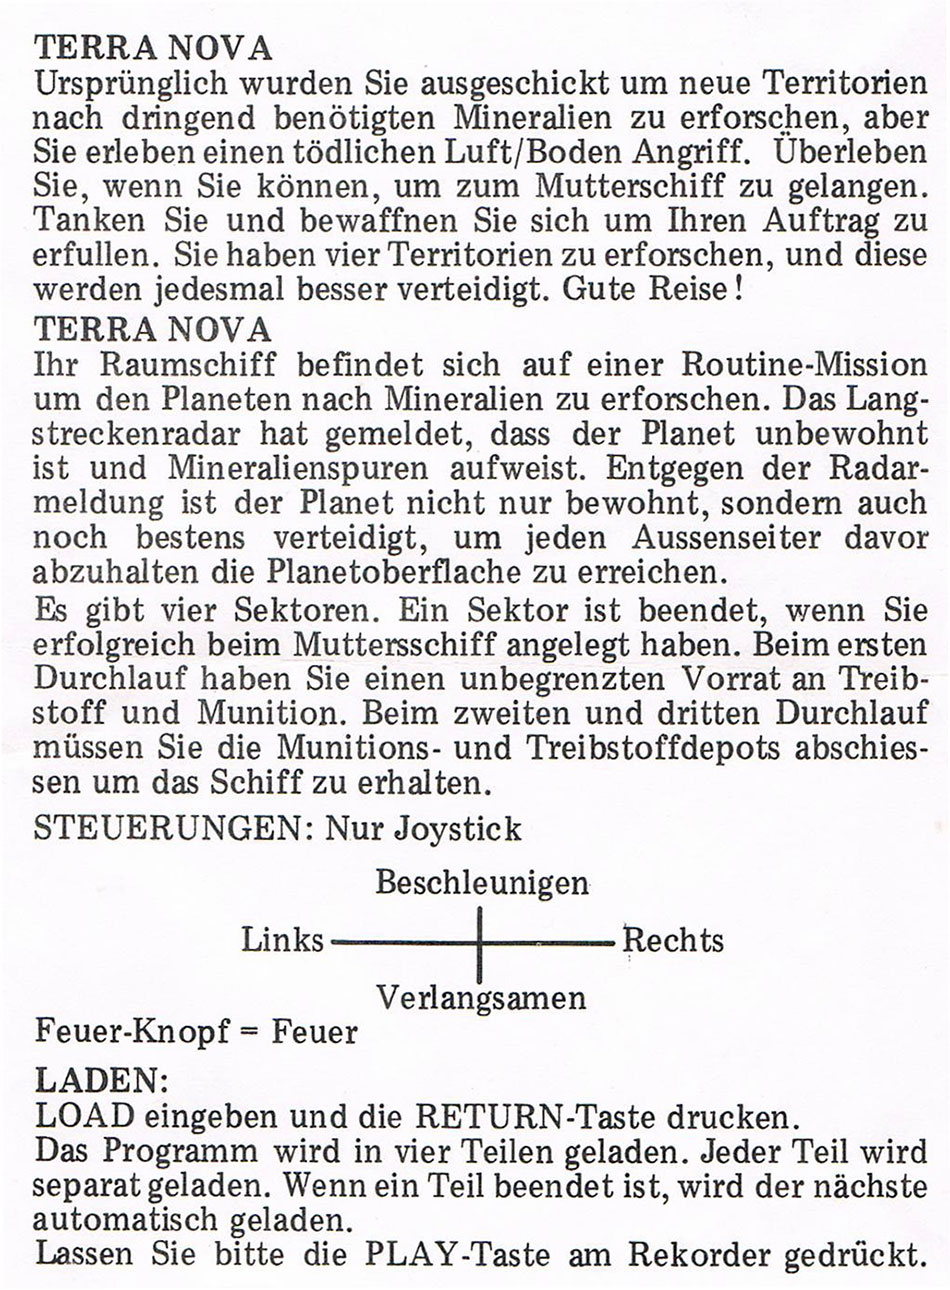 German Instructions Lefleat
Submitted by Rüdiger